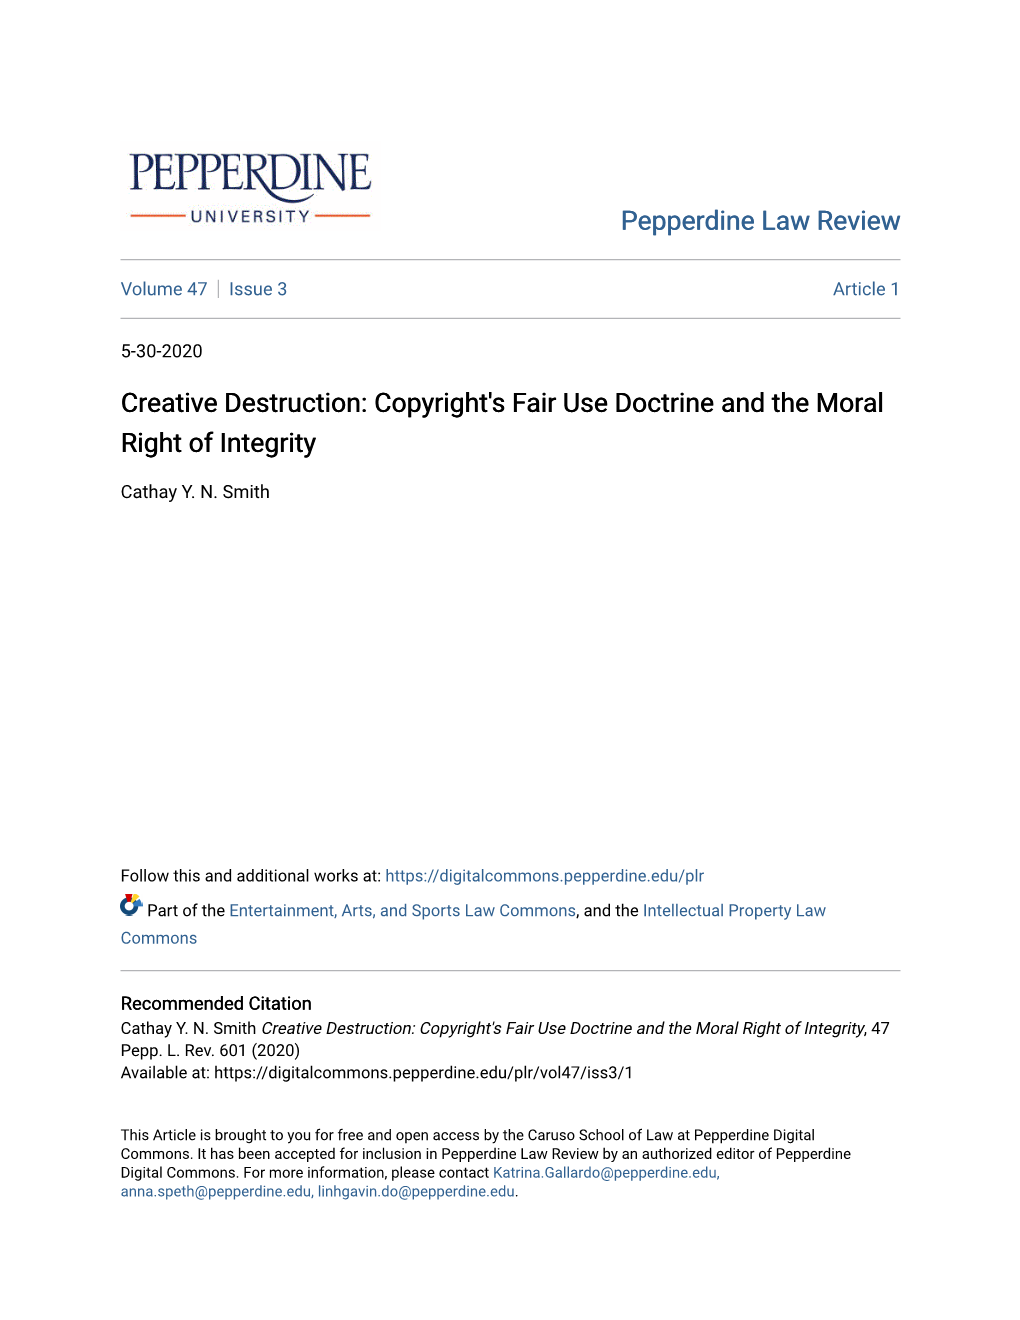 Copyright's Fair Use Doctrine and the Moral Right of Integrity